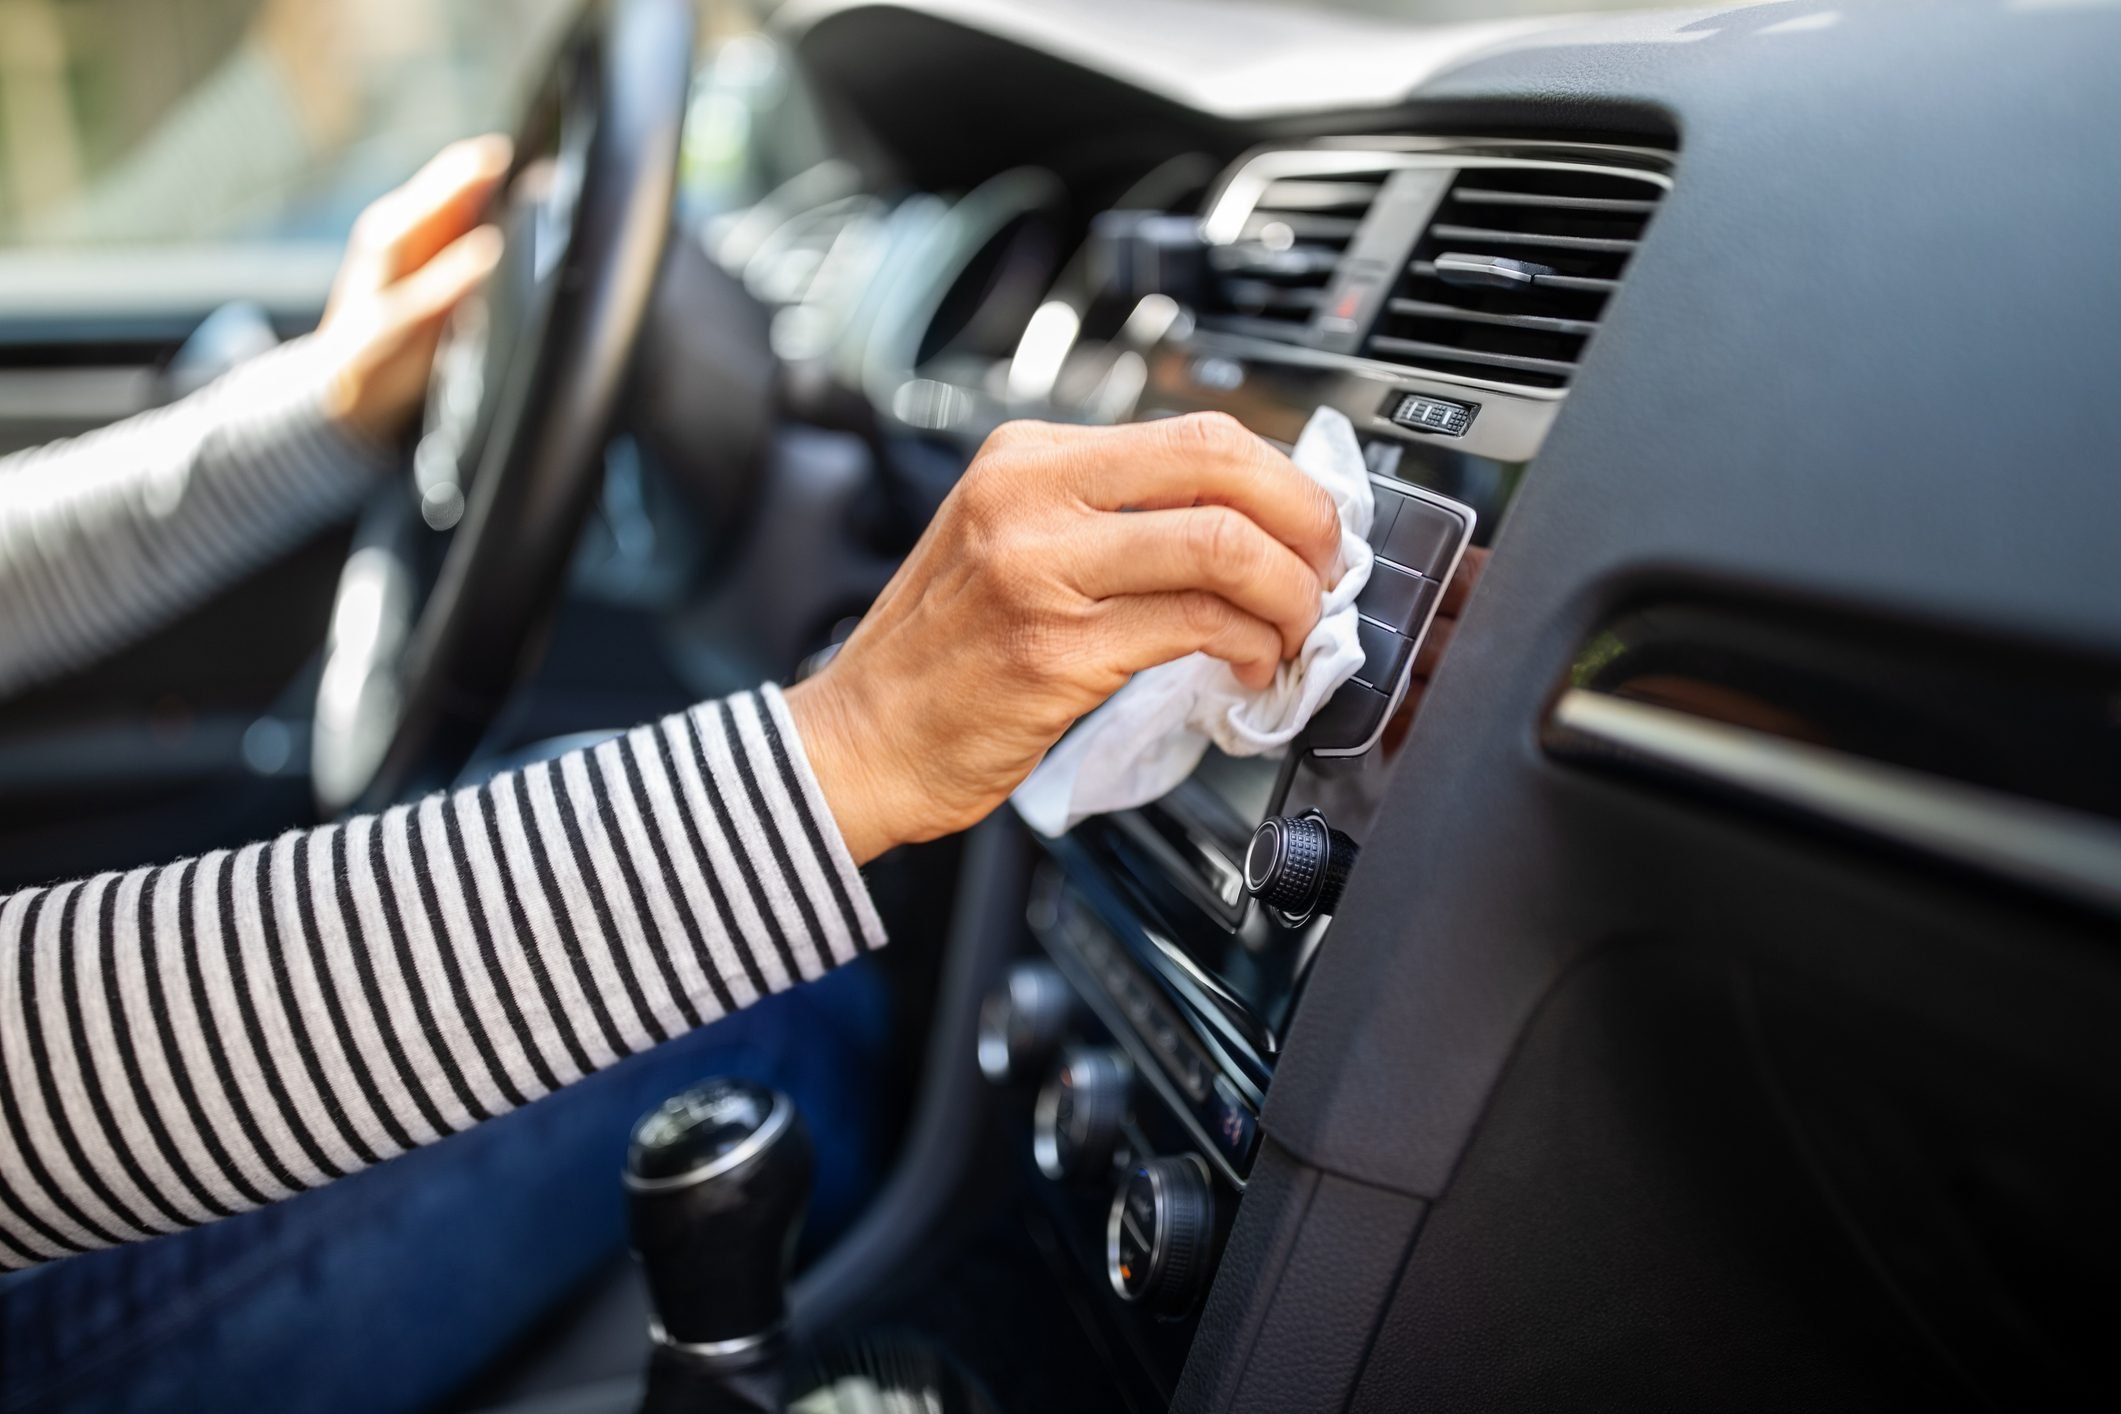 Cleaning and Sanitizing - 6 Steps to DIY Car Interior